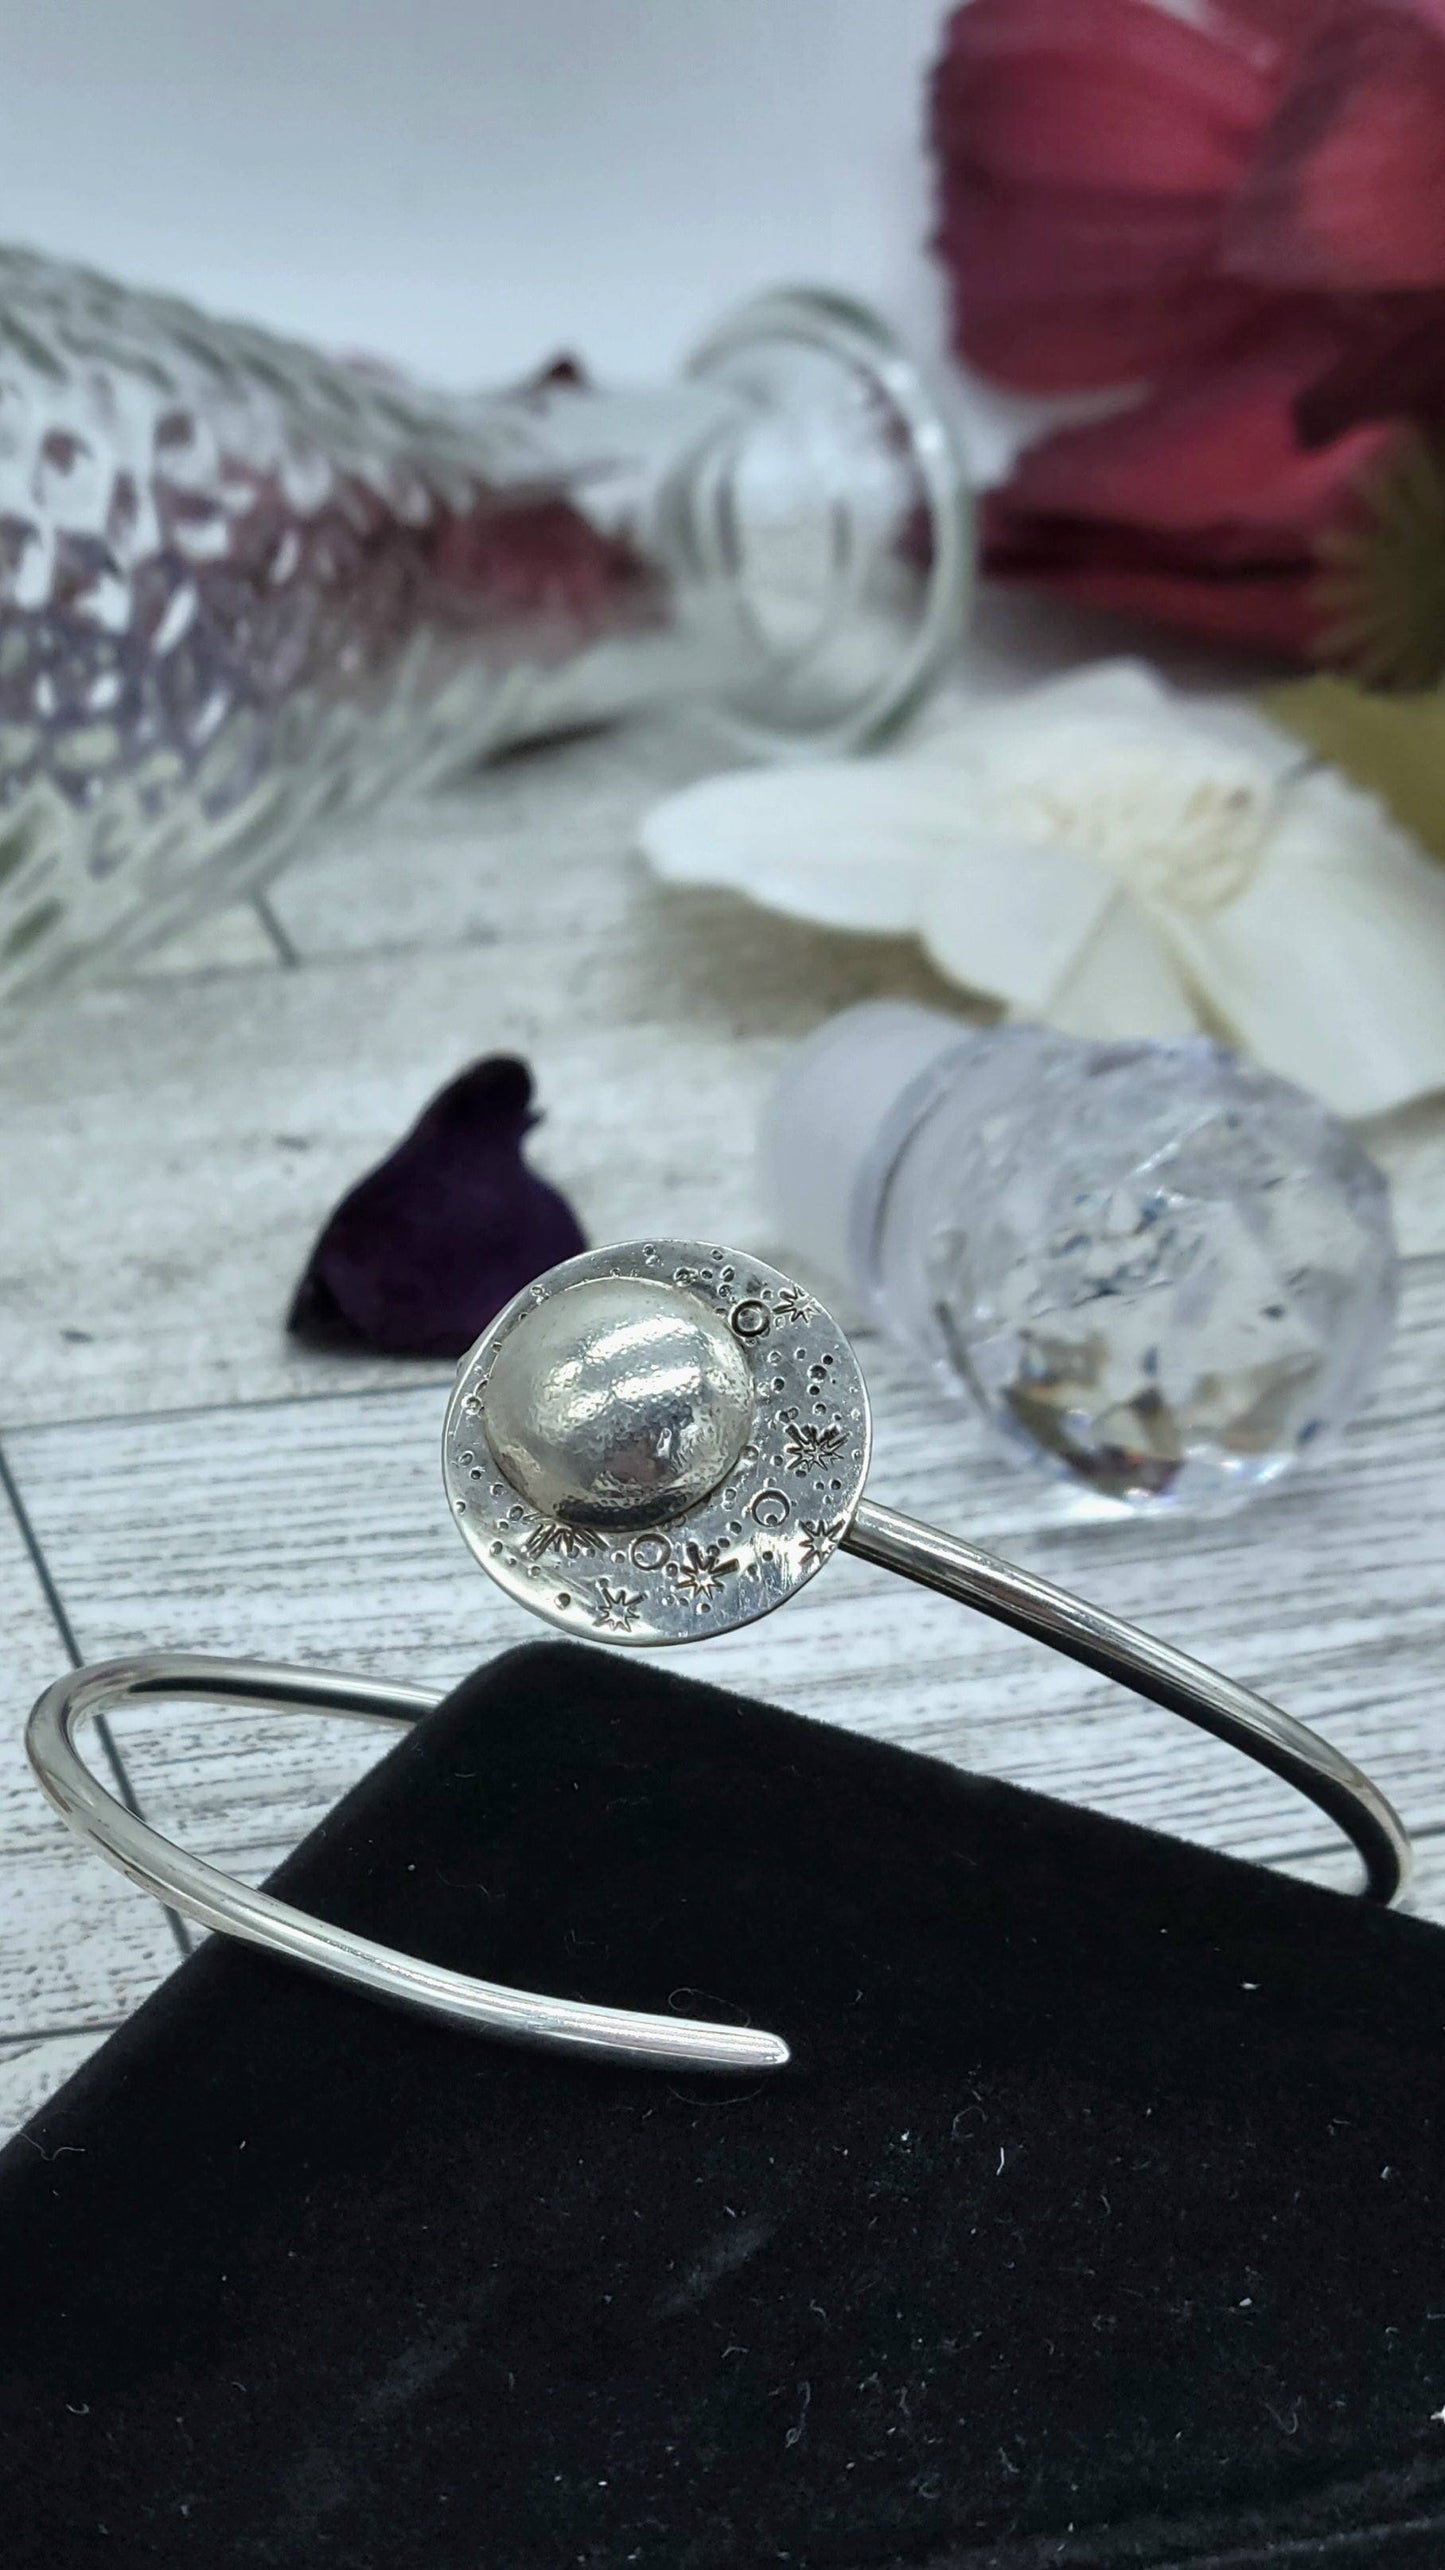 These sterling silver moon bracelets remind you to reflect on your prior successes to overcome present challenges - displayed with glass vase and flowers in the background.